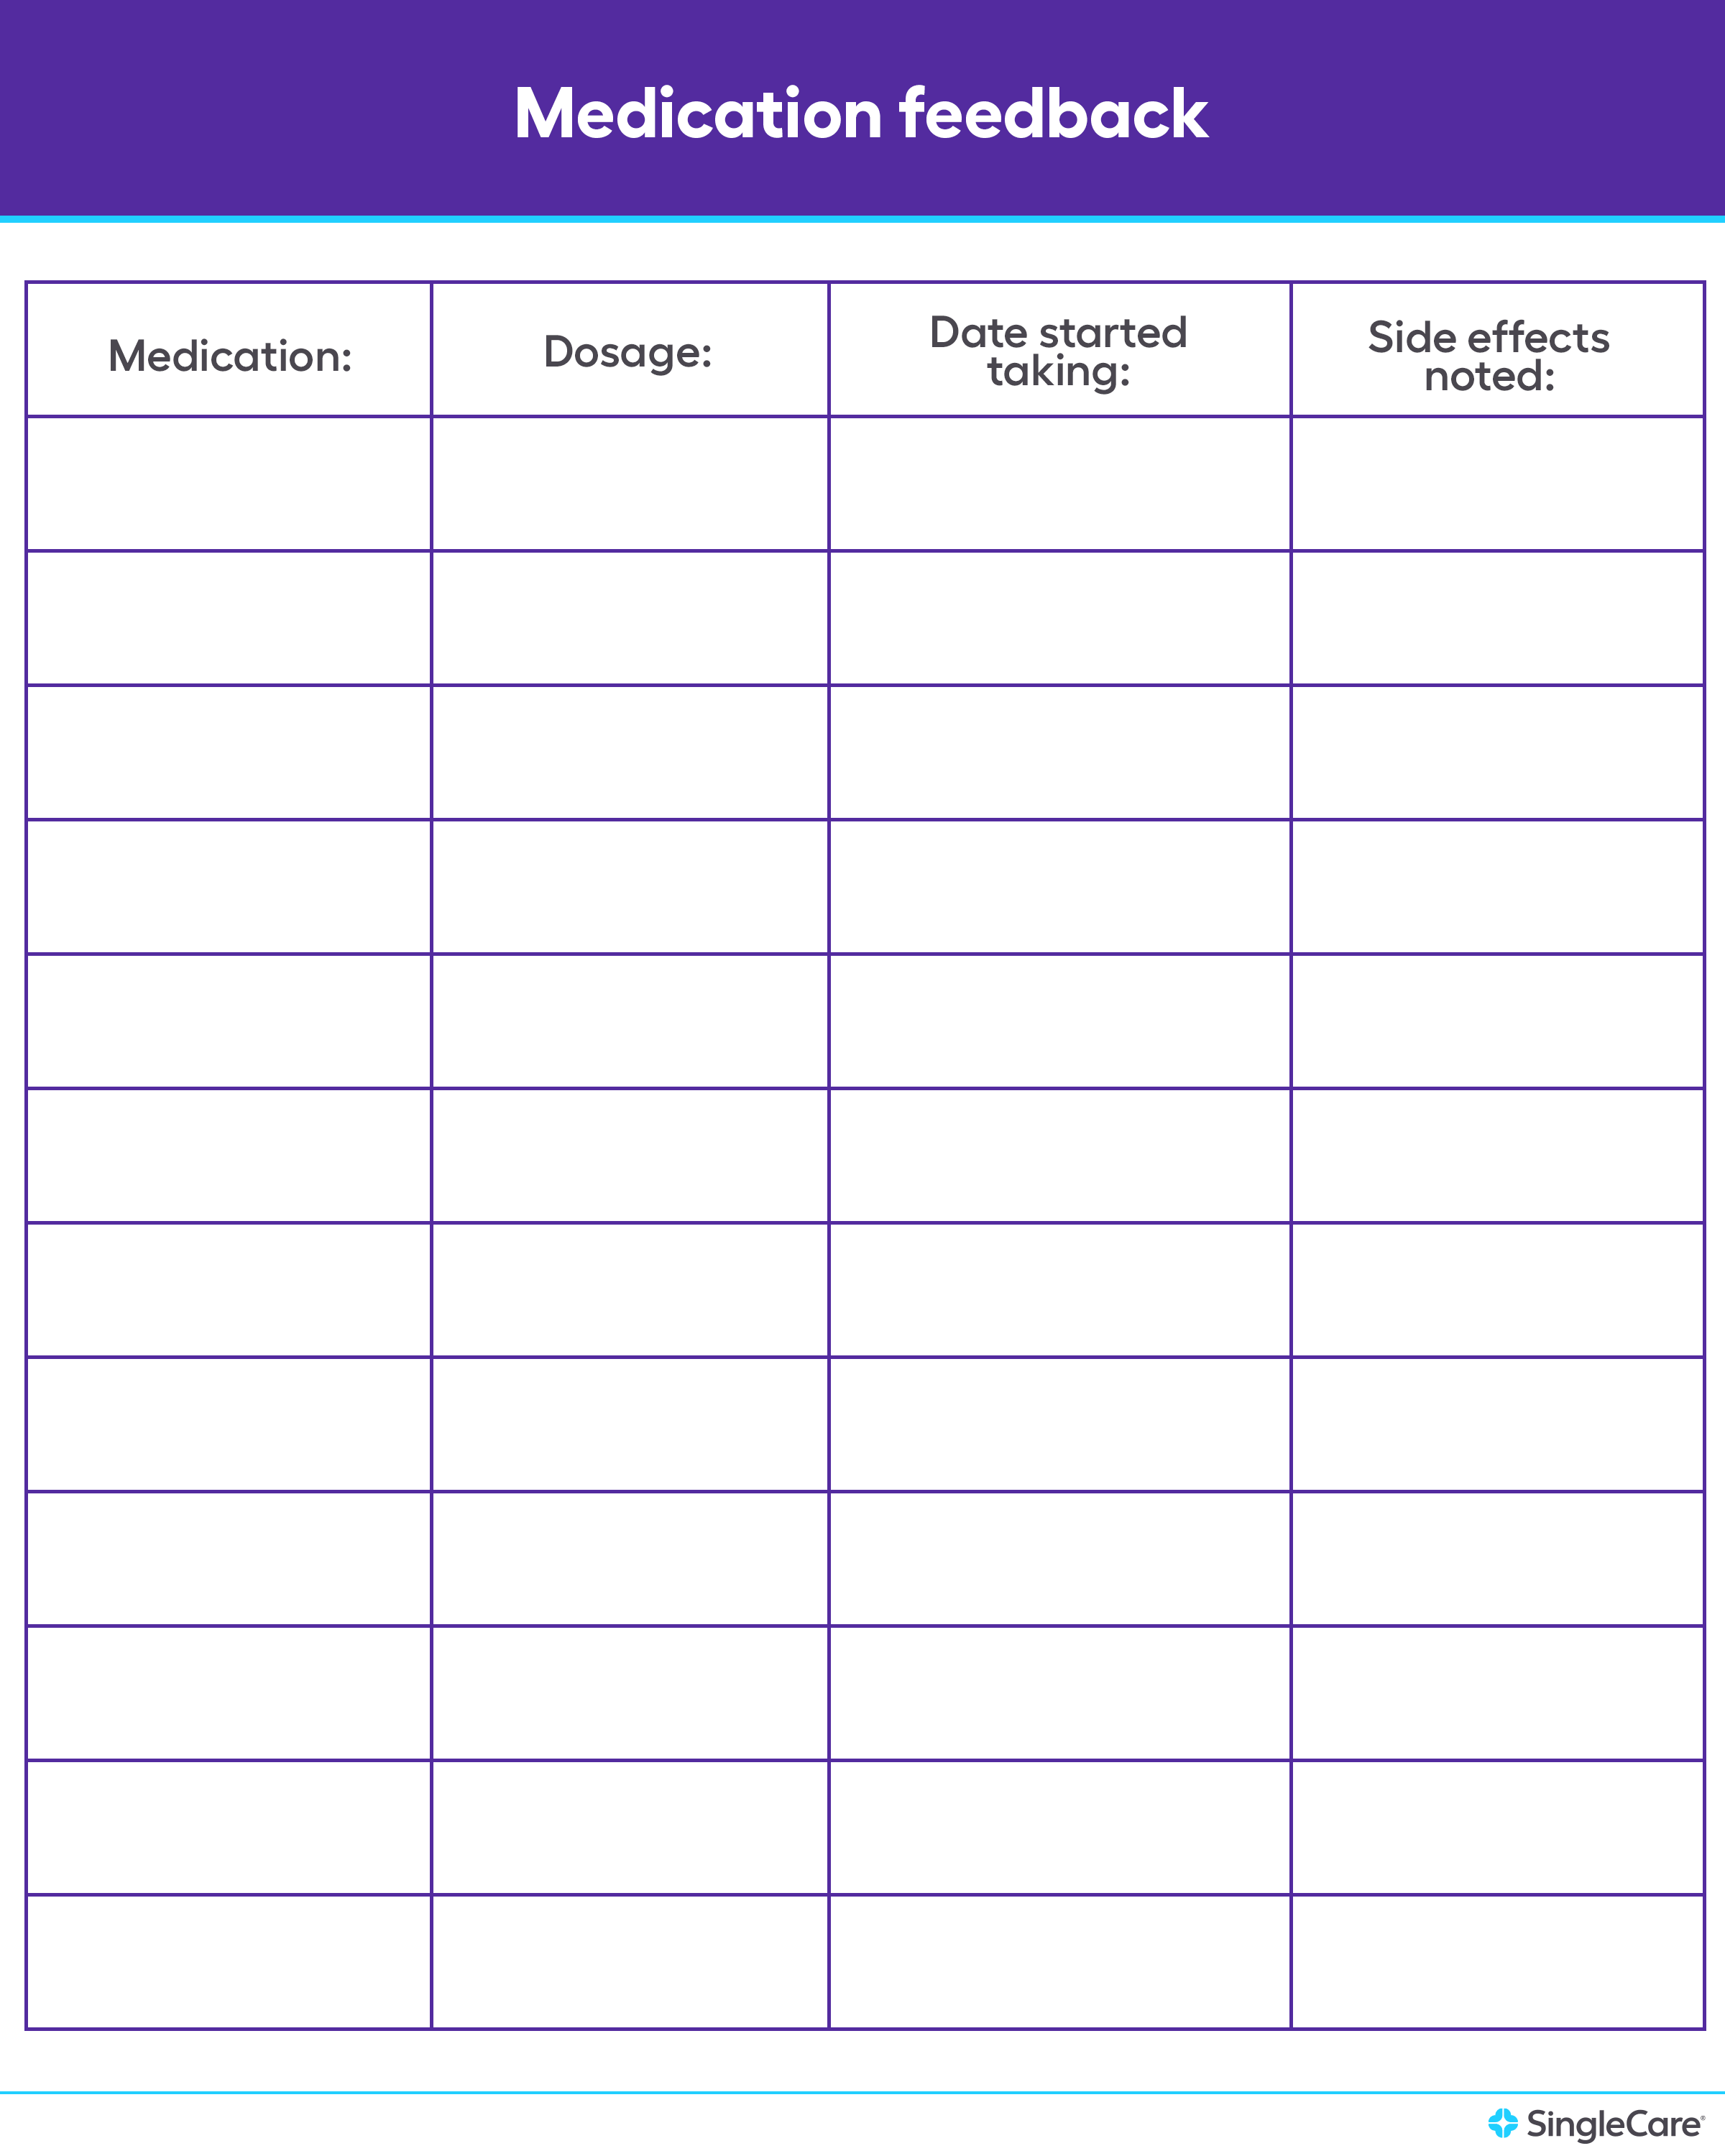 Free Medication List Templates For Patients And Caregivers regarding Free Printable Medication List Template